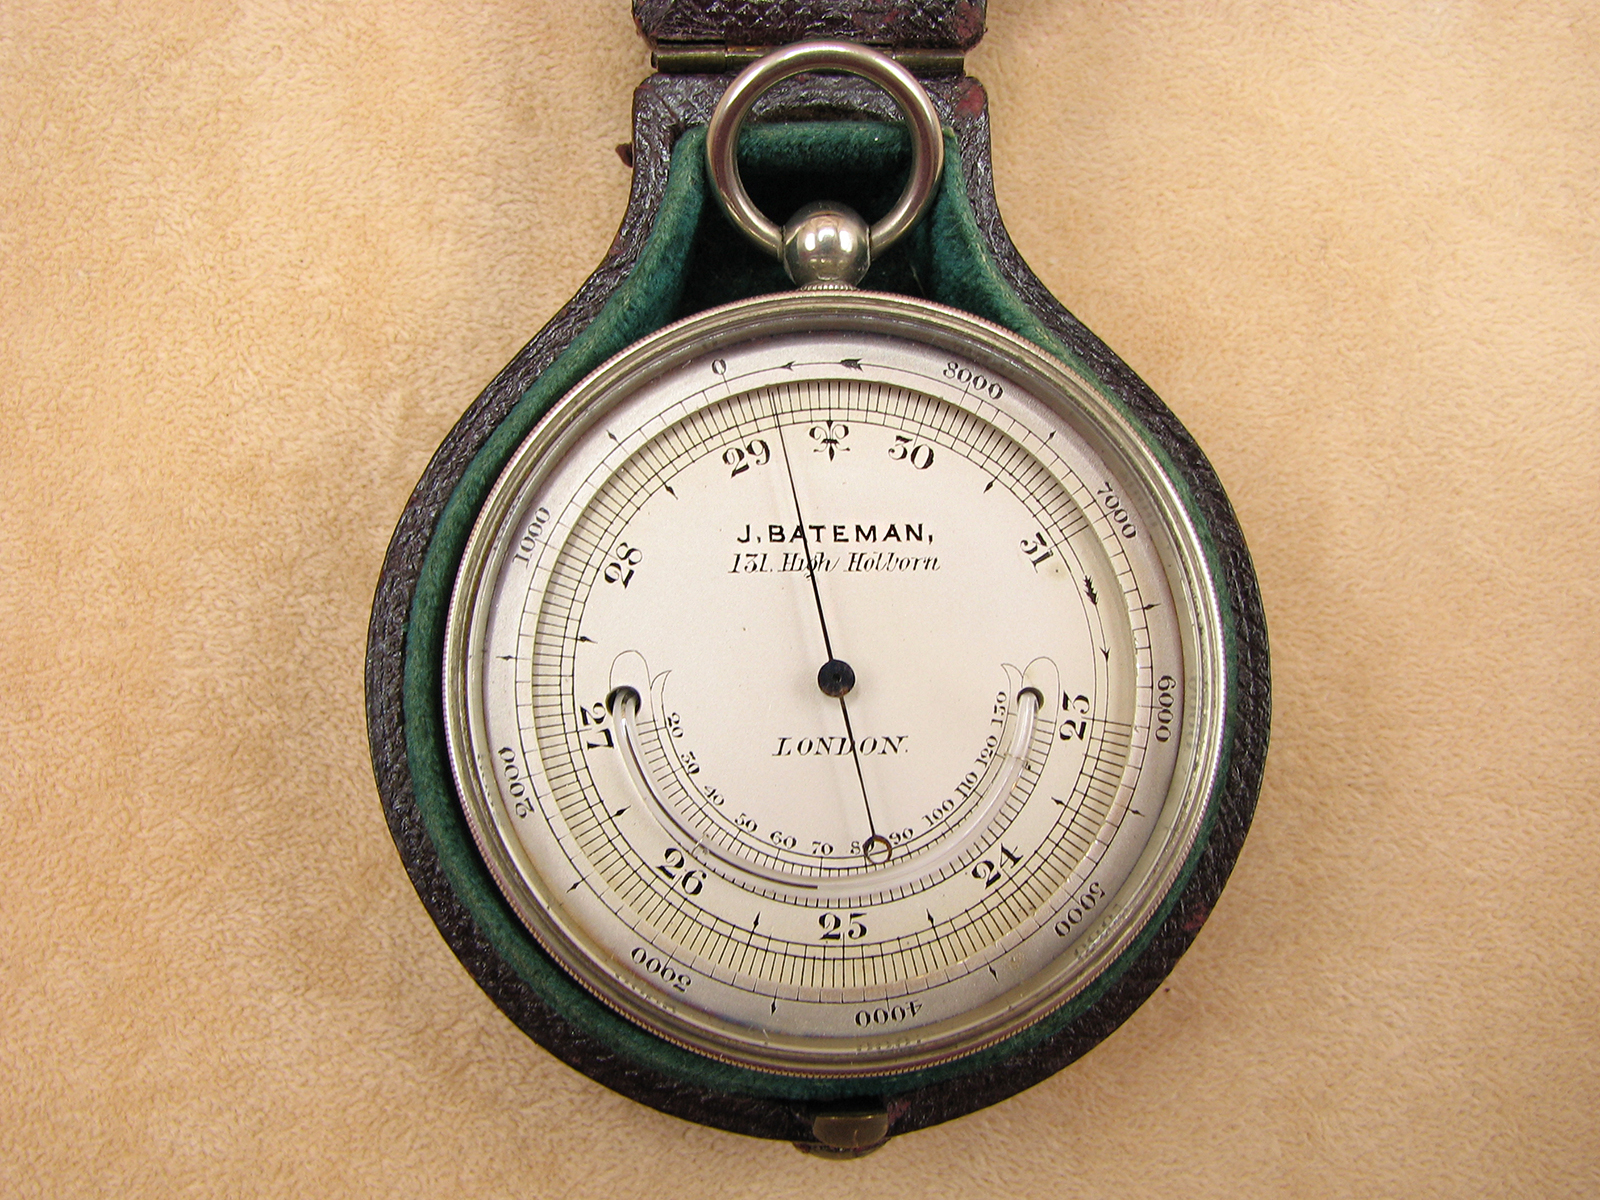 Late 19th century pocket barometer with thermometer 
signed J BATEMAN 131 High Holborn